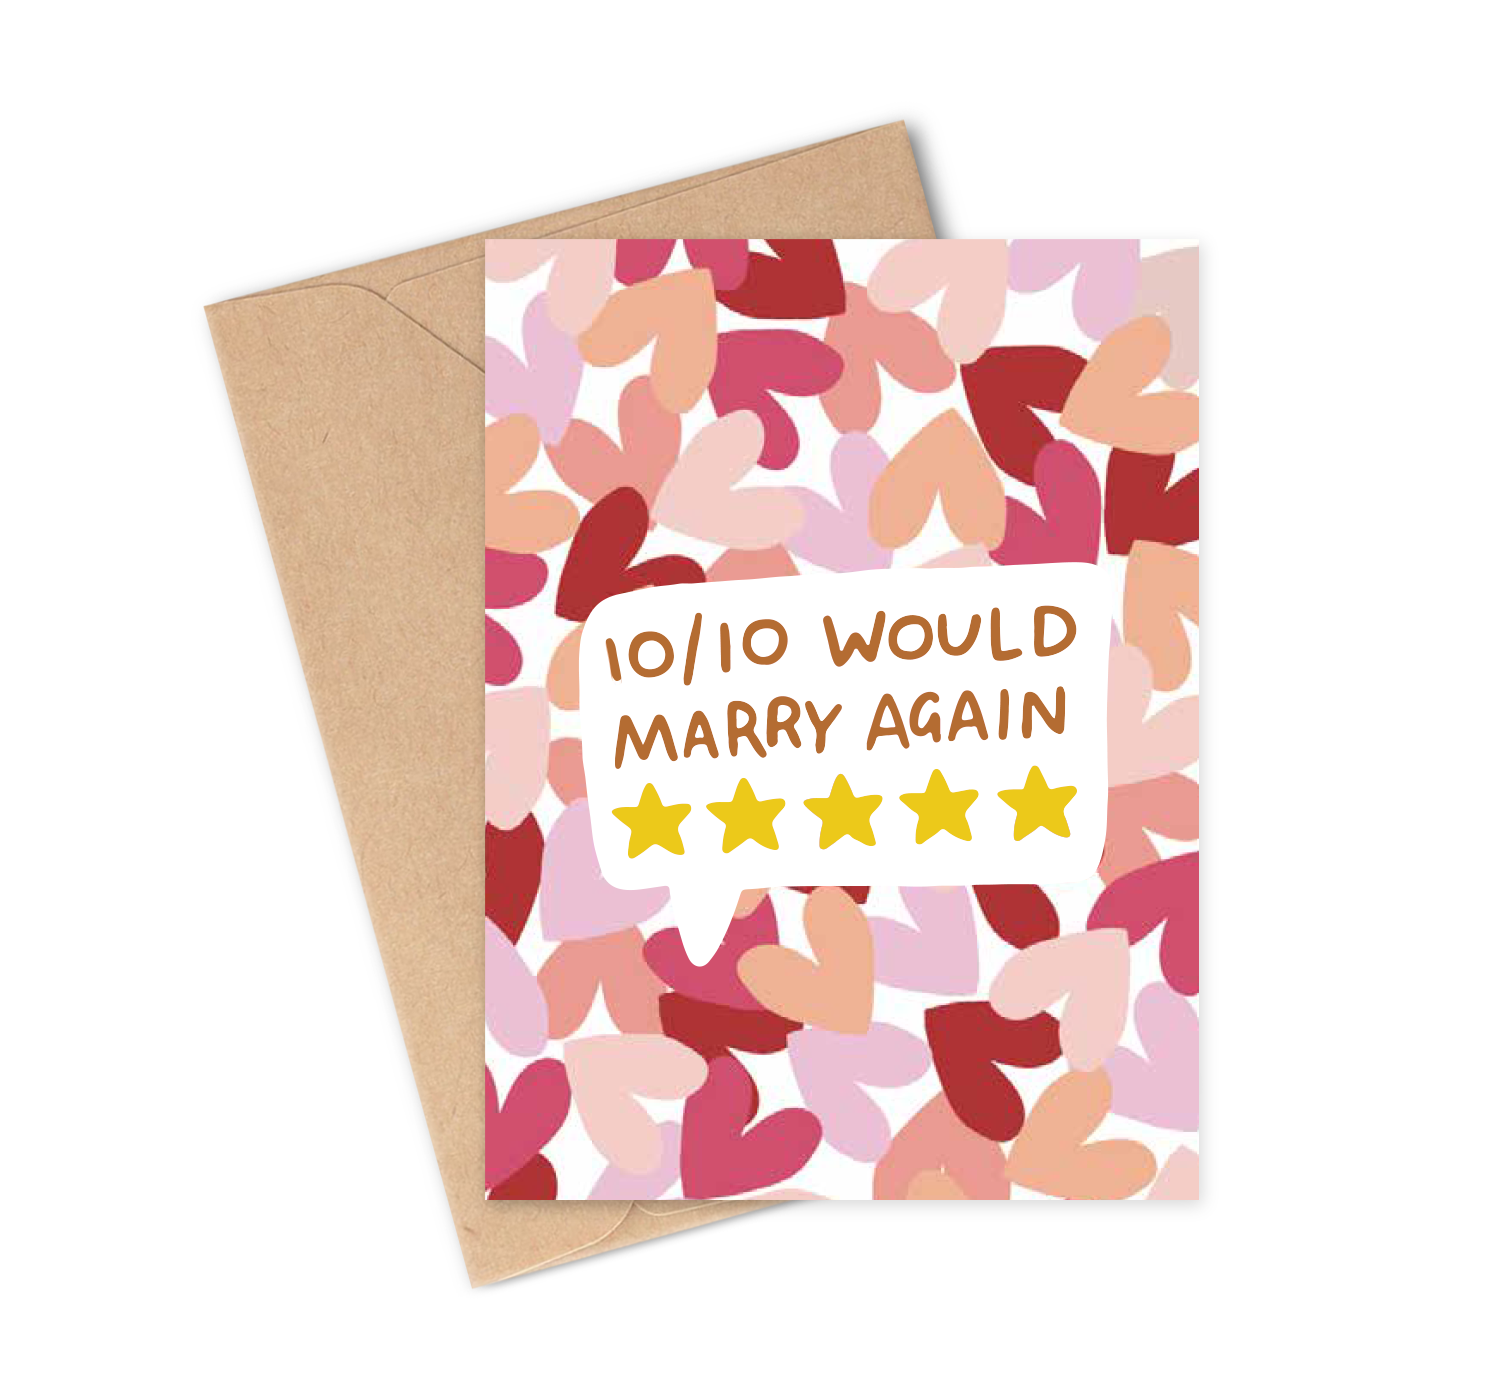 10 out of 10 would marry again greeting card with envelope